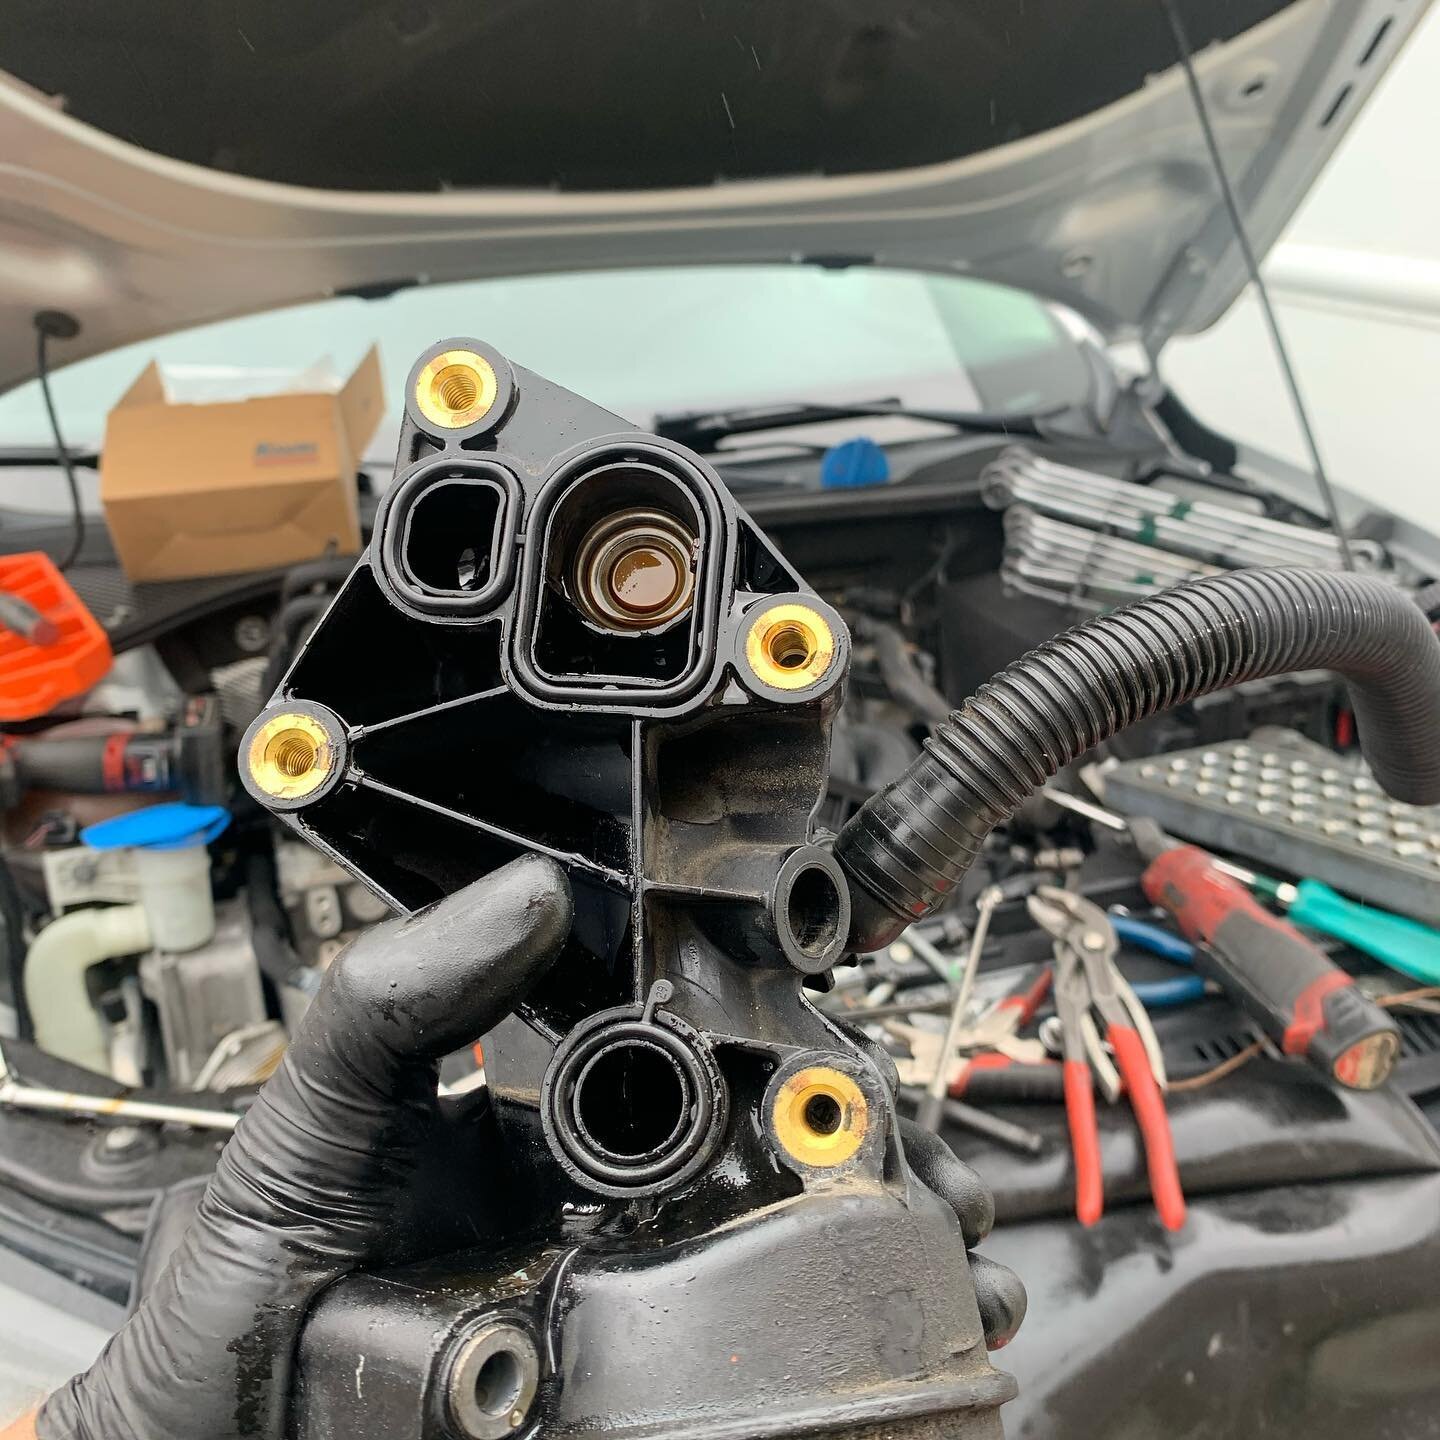 Here we are working on a late model VW Passat 2.5L. A common failure point on many Volkswagen&rsquo;s are these oil filter adapter o-rings as well as oil cooler o-rings.

Symptoms can include oil puddles in the driveway and even mimic head gasket fai